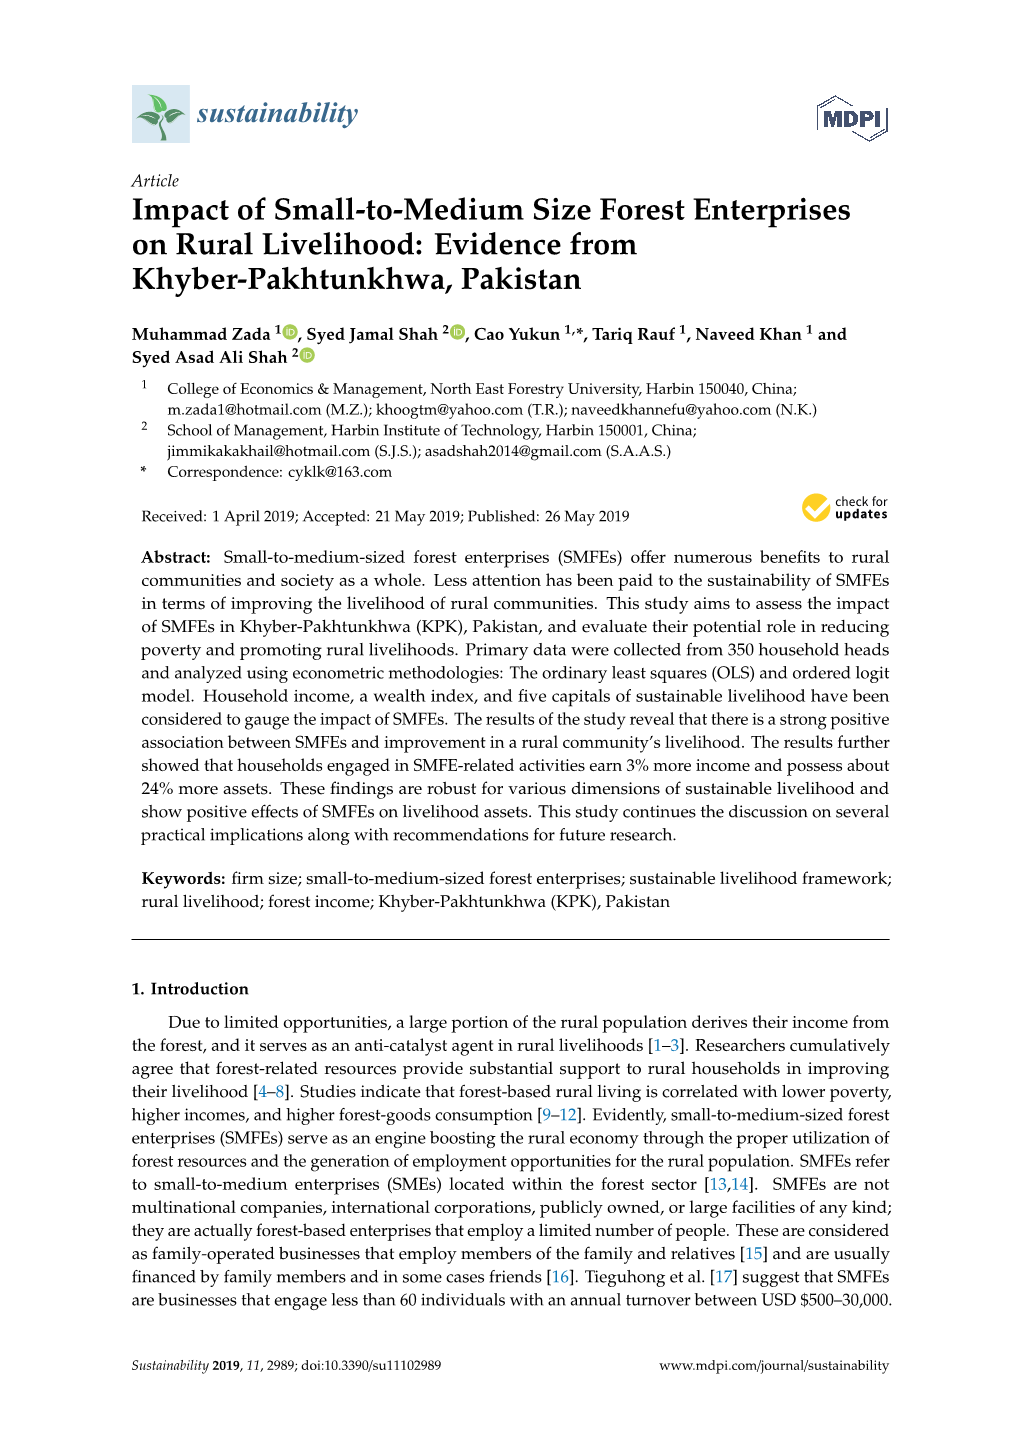 Impact of Small-To-Medium Size Forest Enterprises on Rural Livelihood: Evidence from Khyber-Pakhtunkhwa, Pakistan